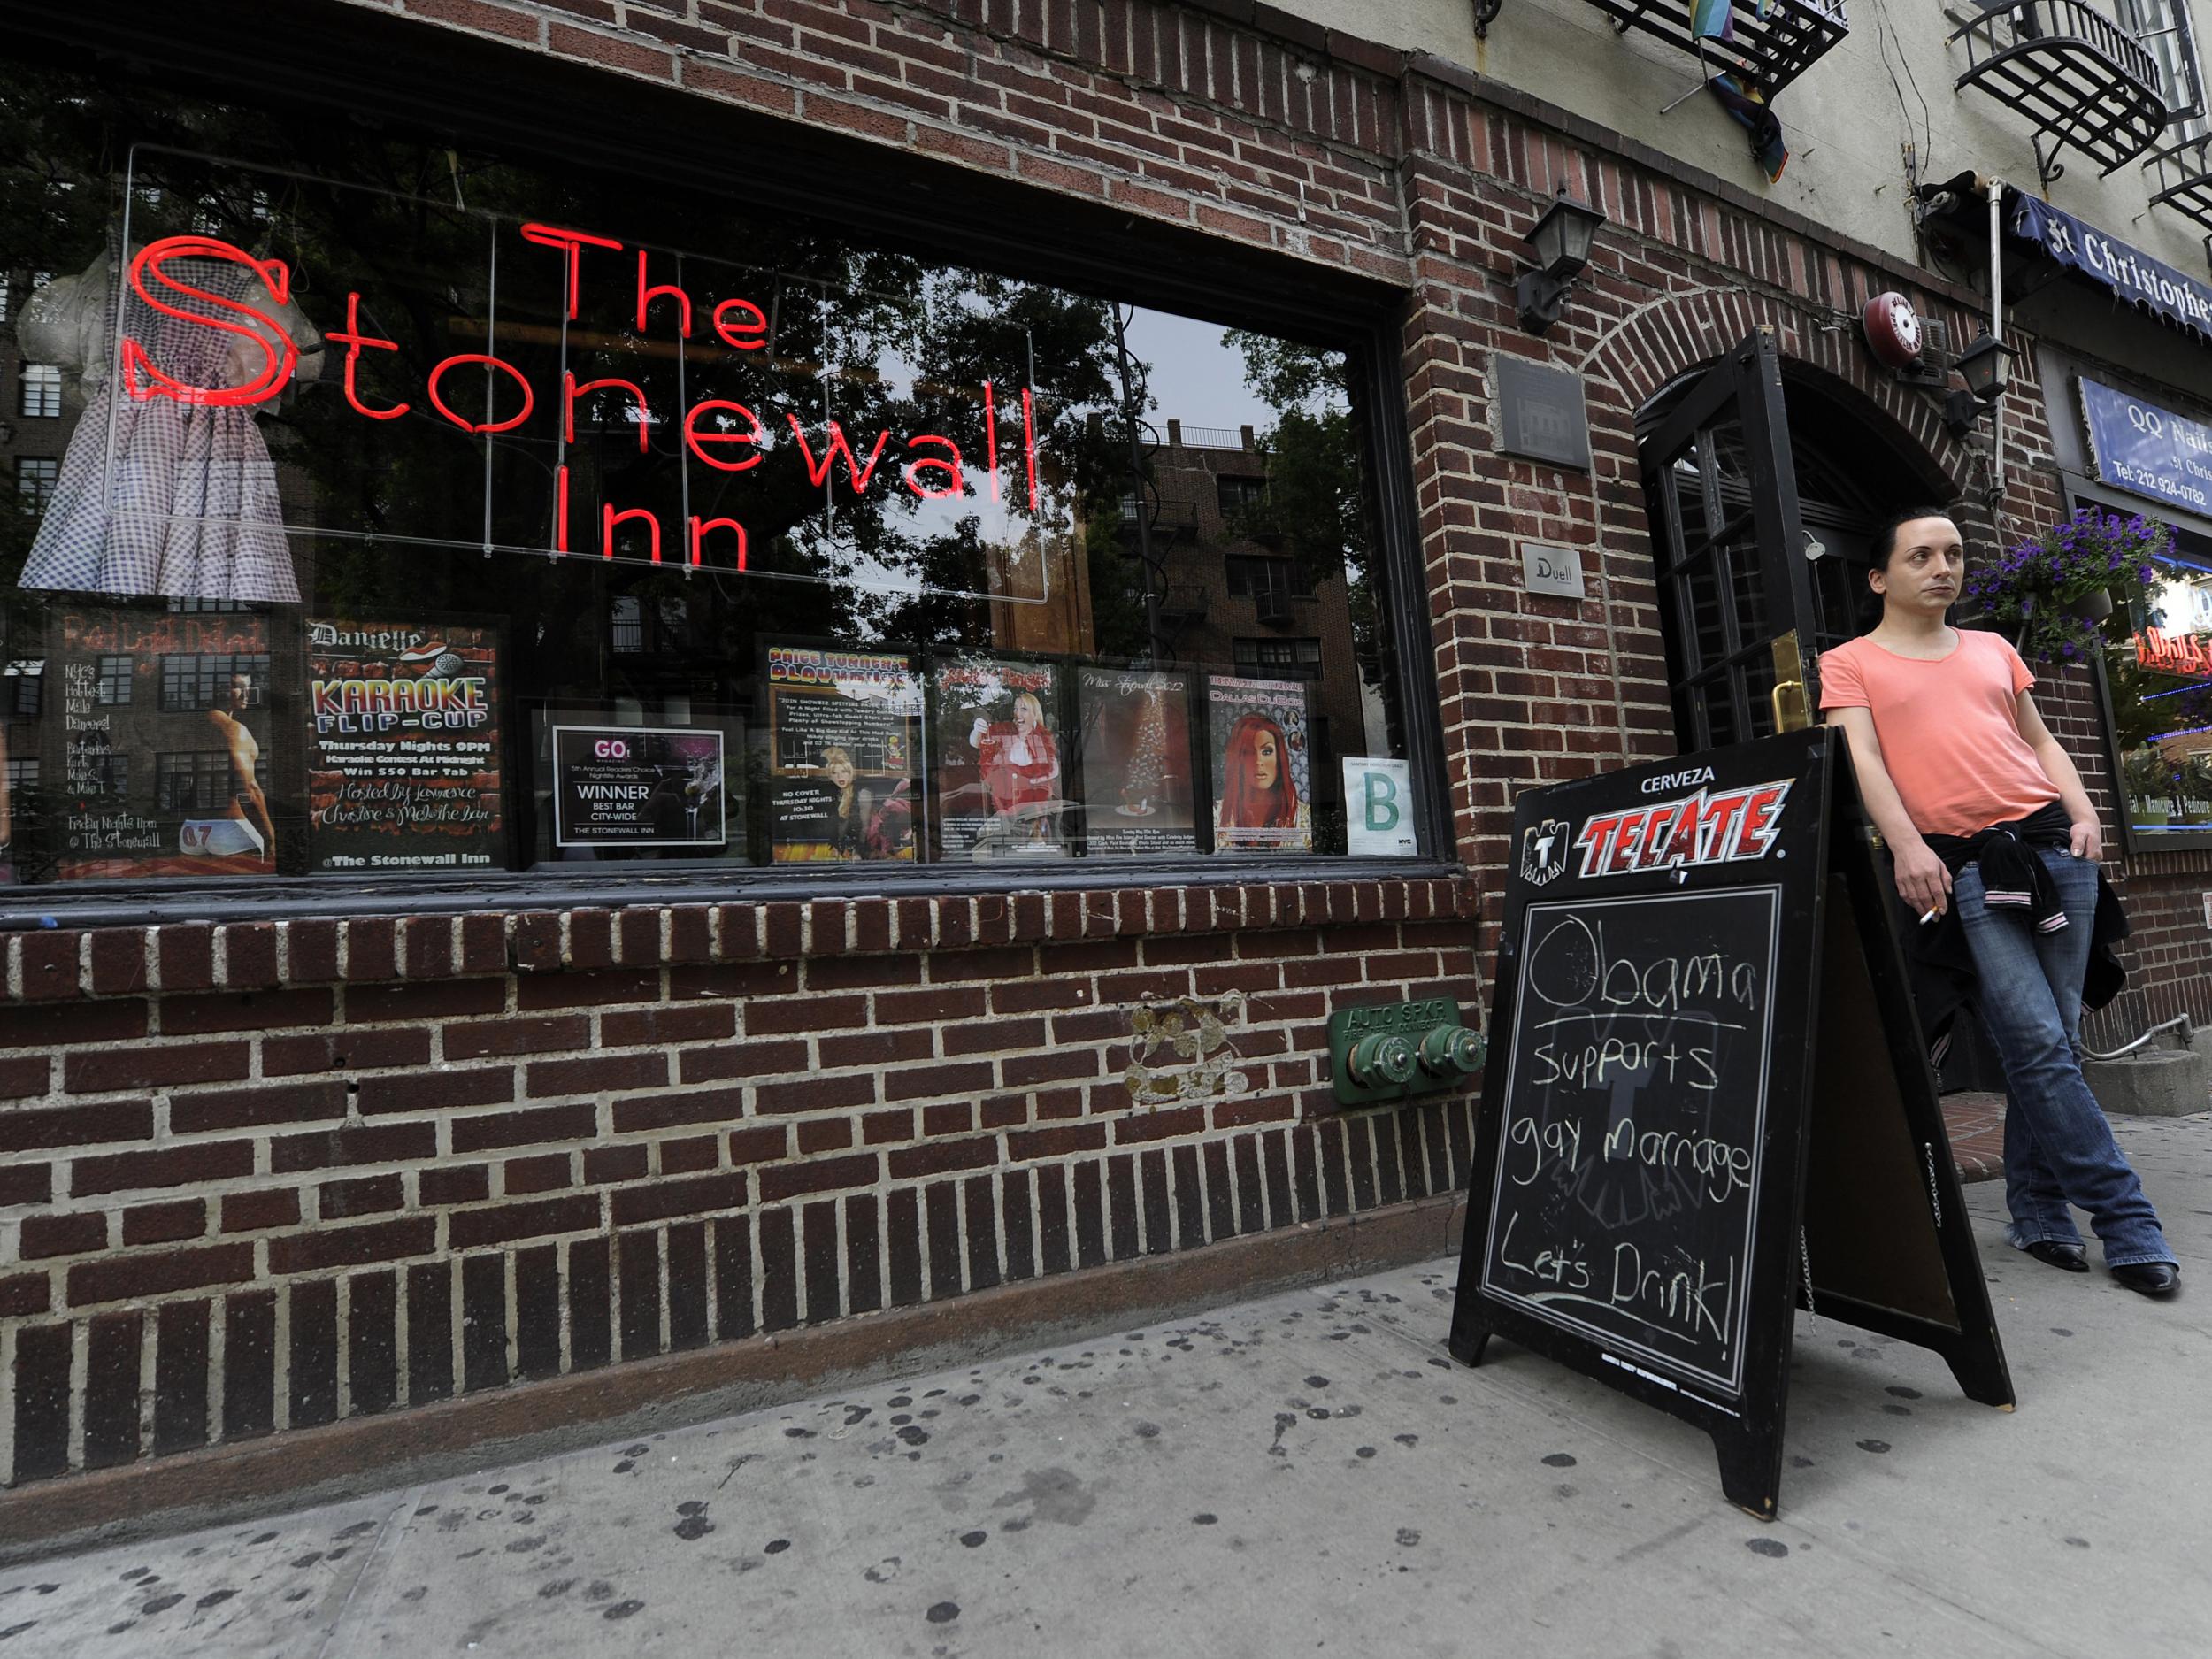 The Stonewall Inn, where the gay rights movement began (Getty)